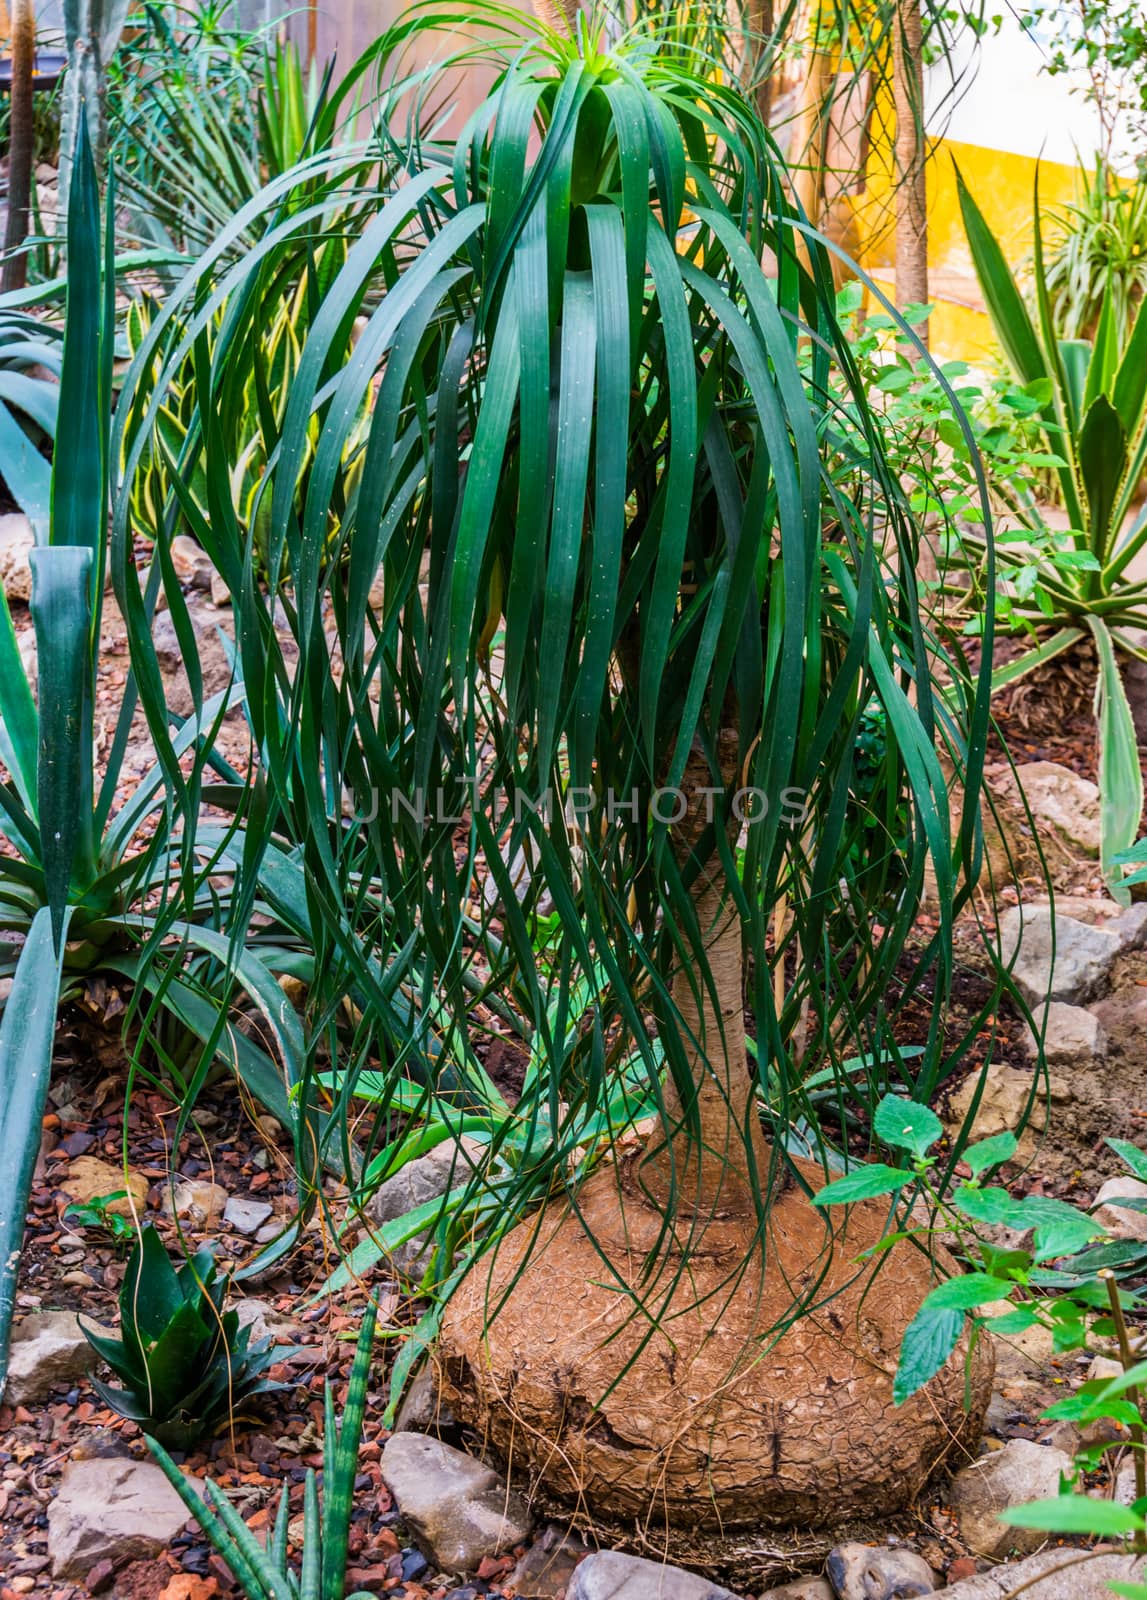 young elephants foot plant in a tropical garden, popular garden and houseplant, ornamental trees by charlottebleijenberg